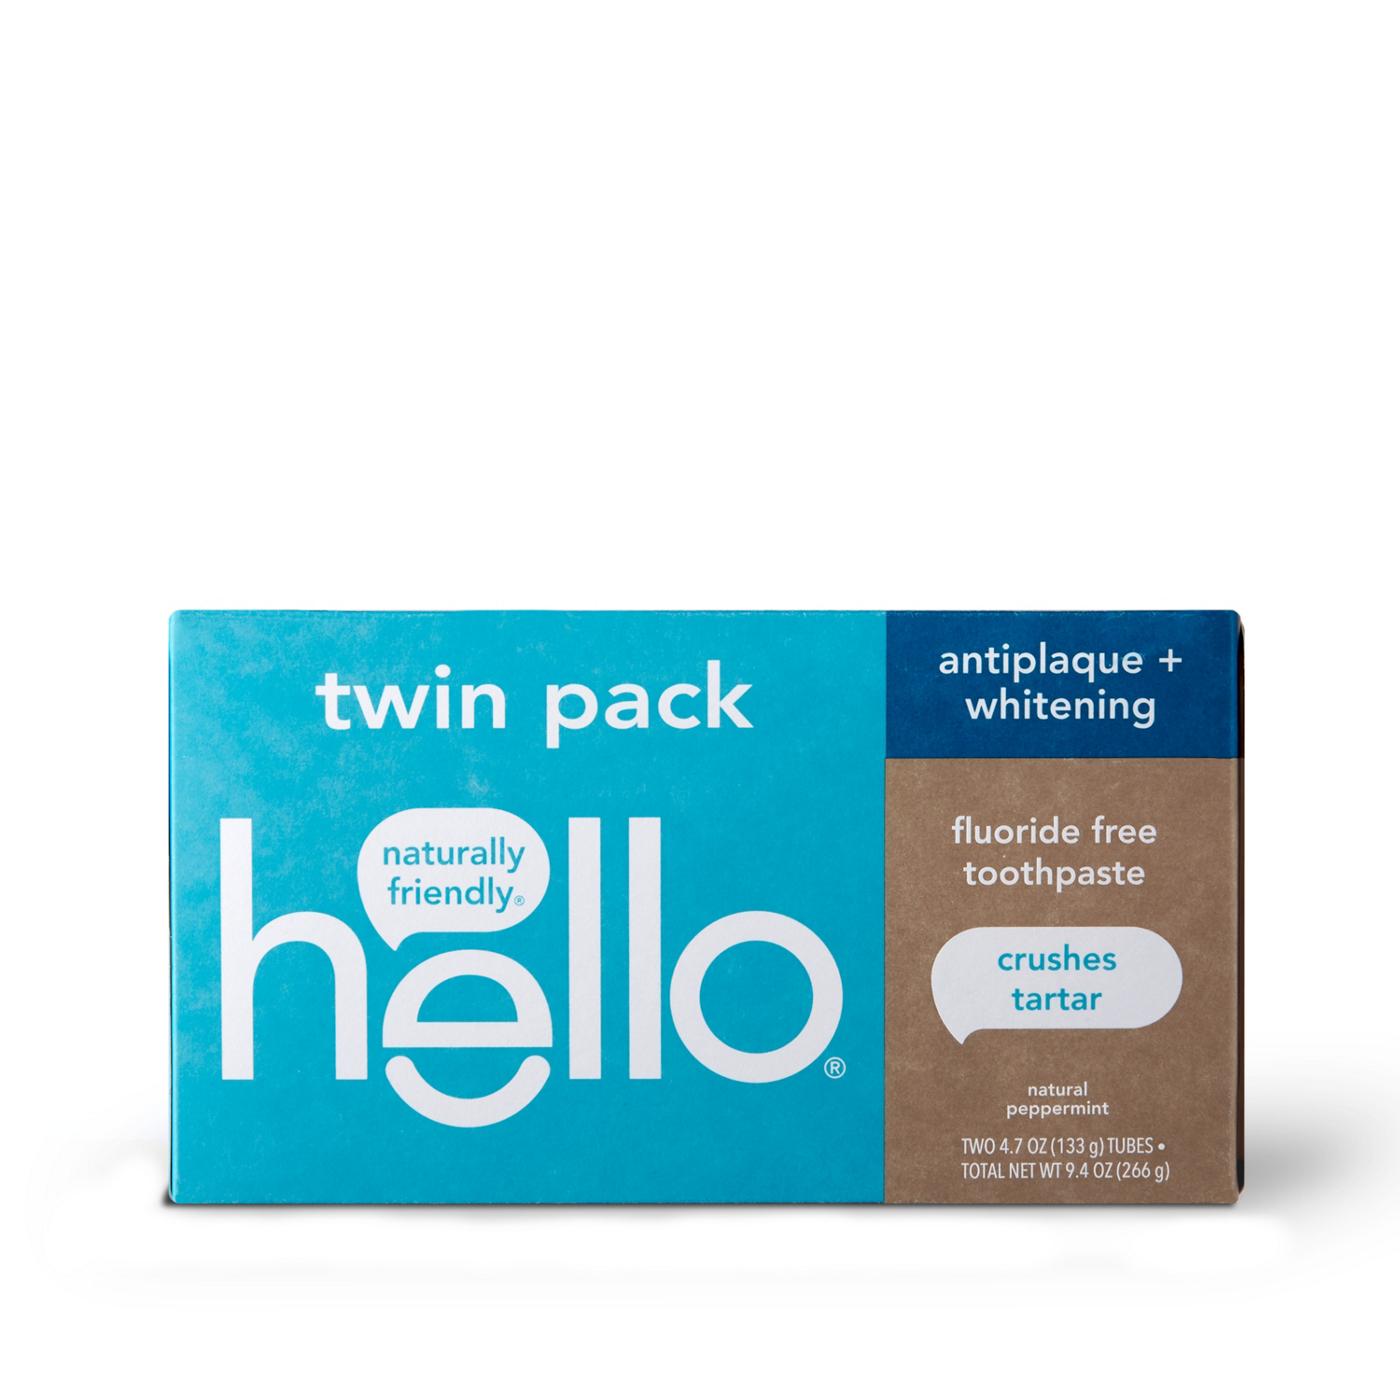 hello Antiplaque + Whitening  Natural Peppermint Fluoride Free Toothpaste, 2 Pk; image 9 of 9